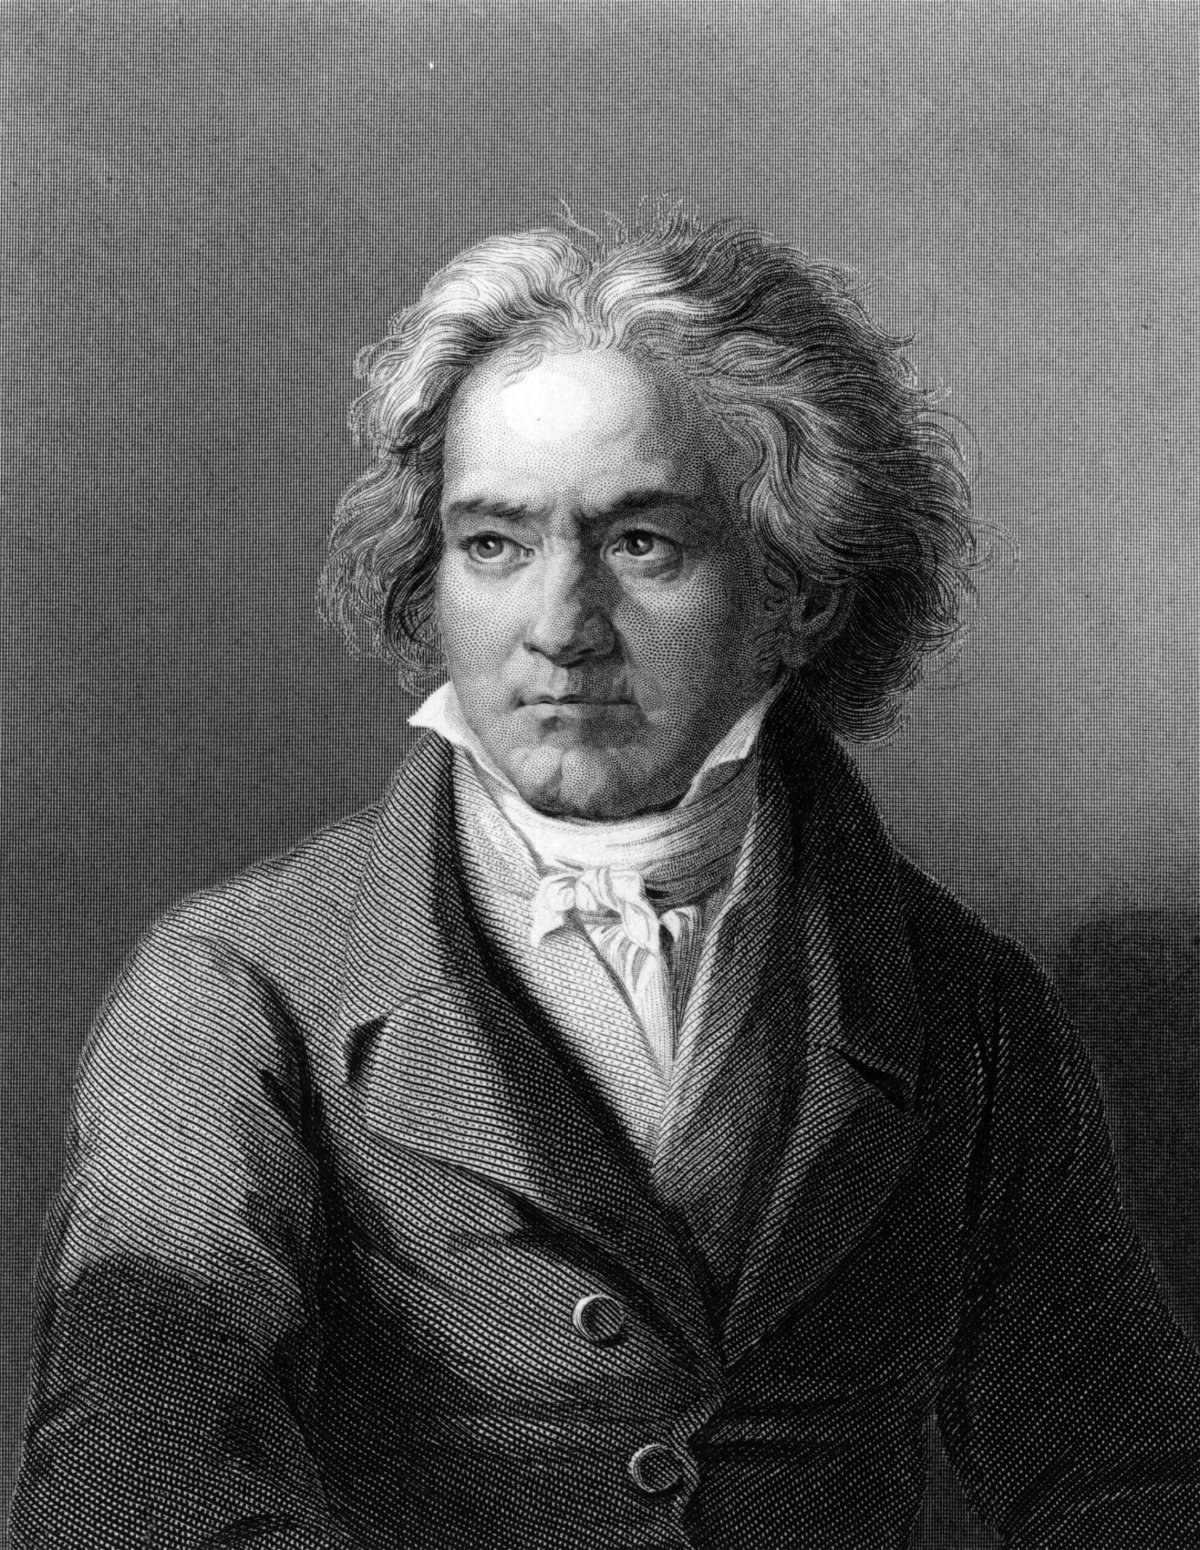 <i>Hulton Archive/Getty Images via CNN Newsource</i><br/>An engraving shows German composer and pianist Ludwig van Beethoven in 1805.